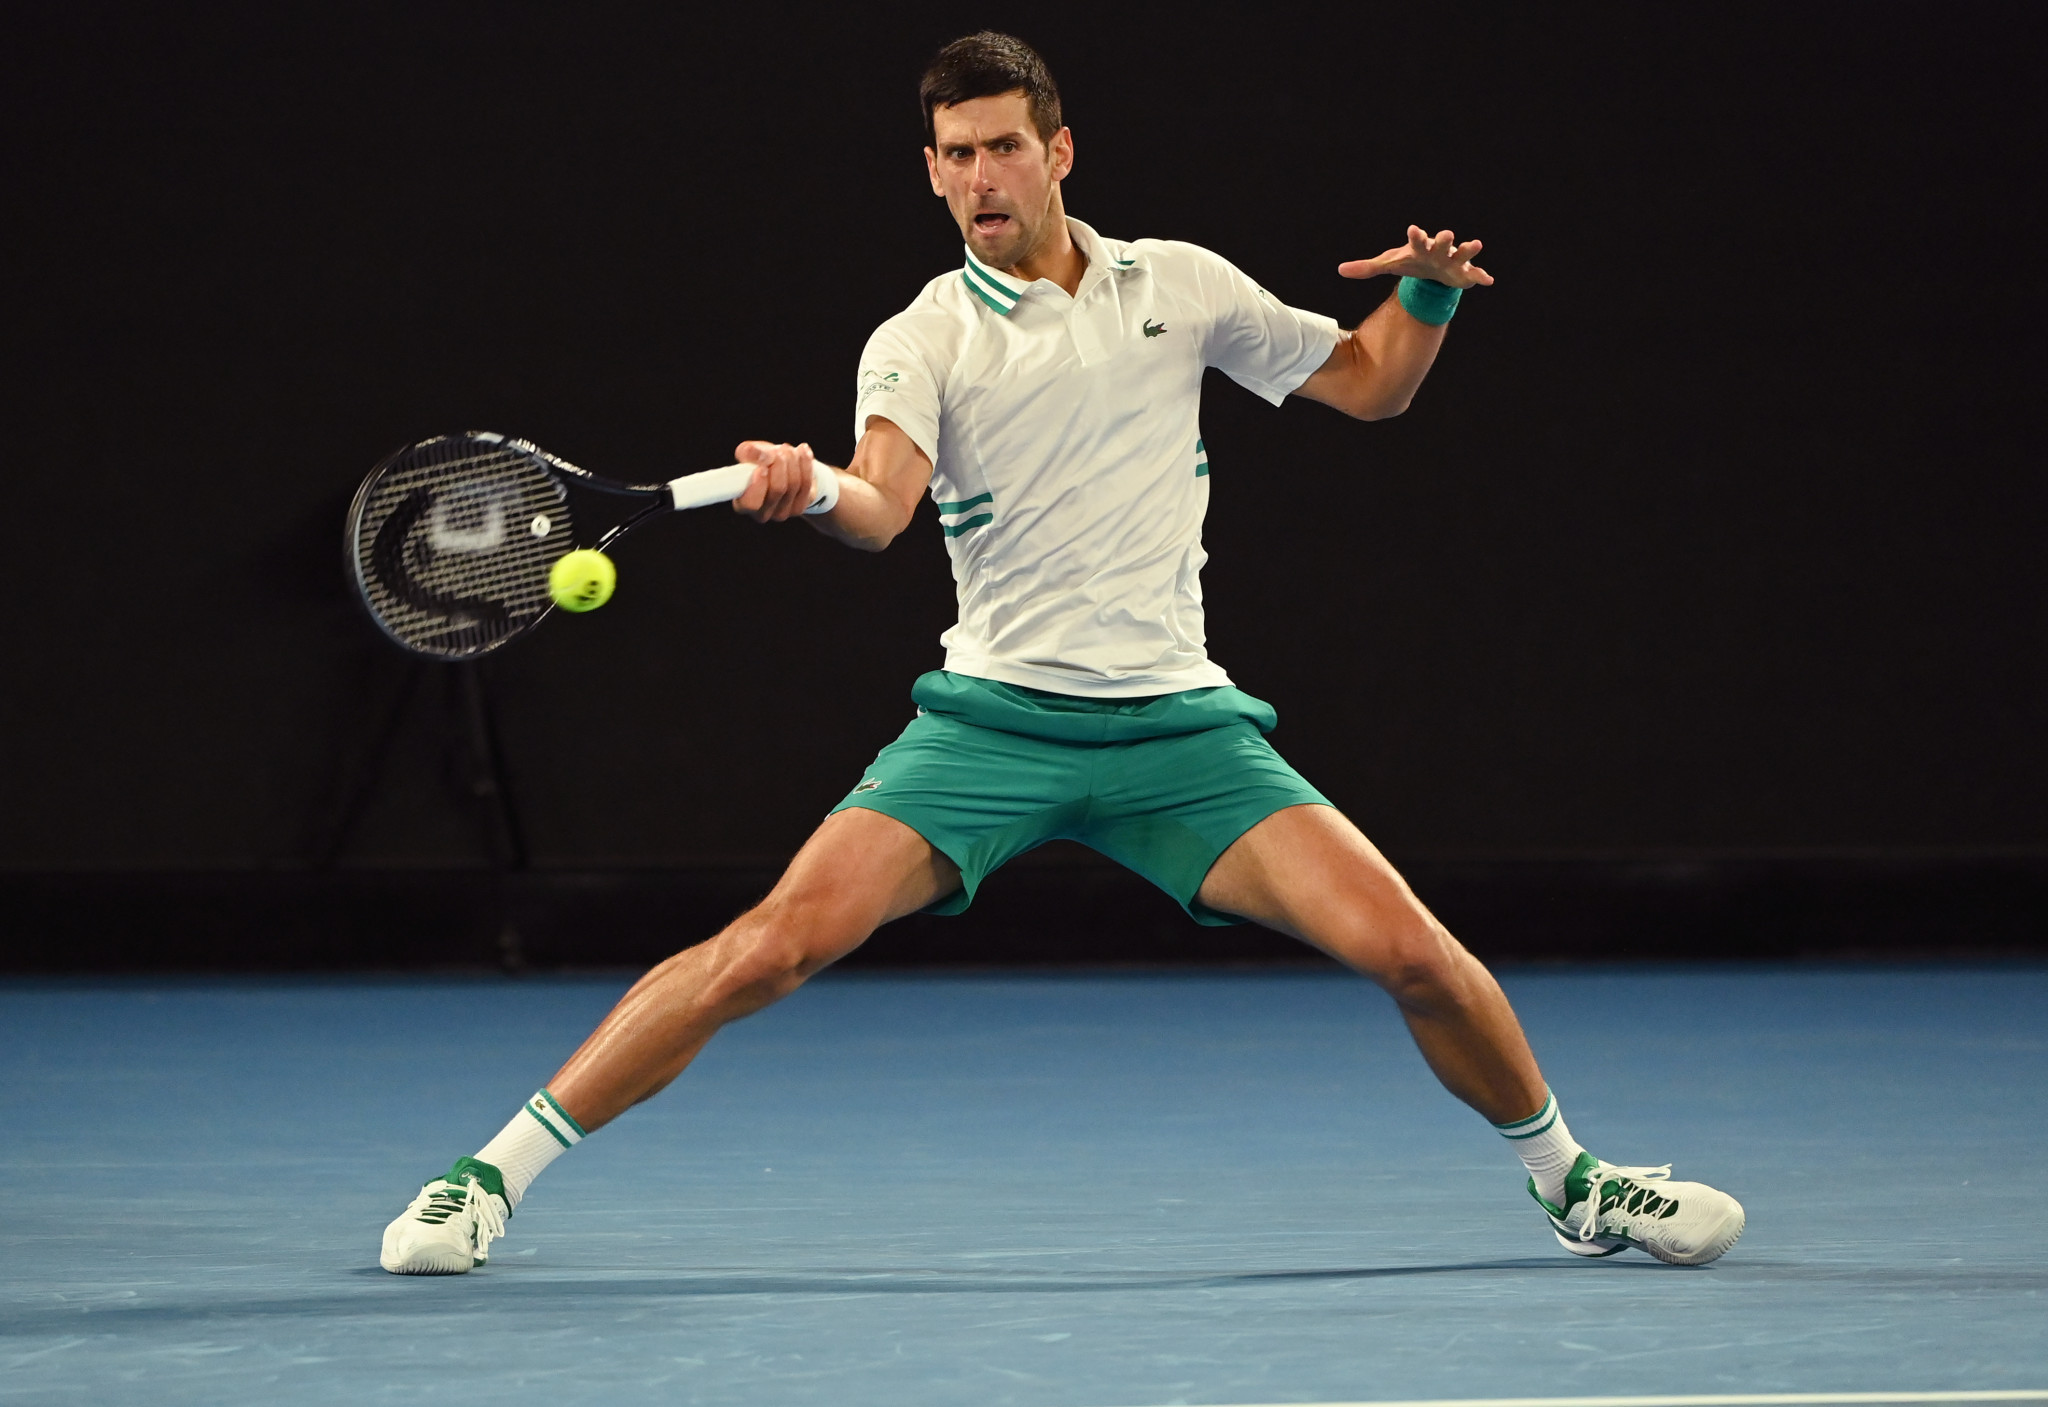 Djokovic will need to be vaccinated if to chase record 21st Grand Slam title at Australian Open